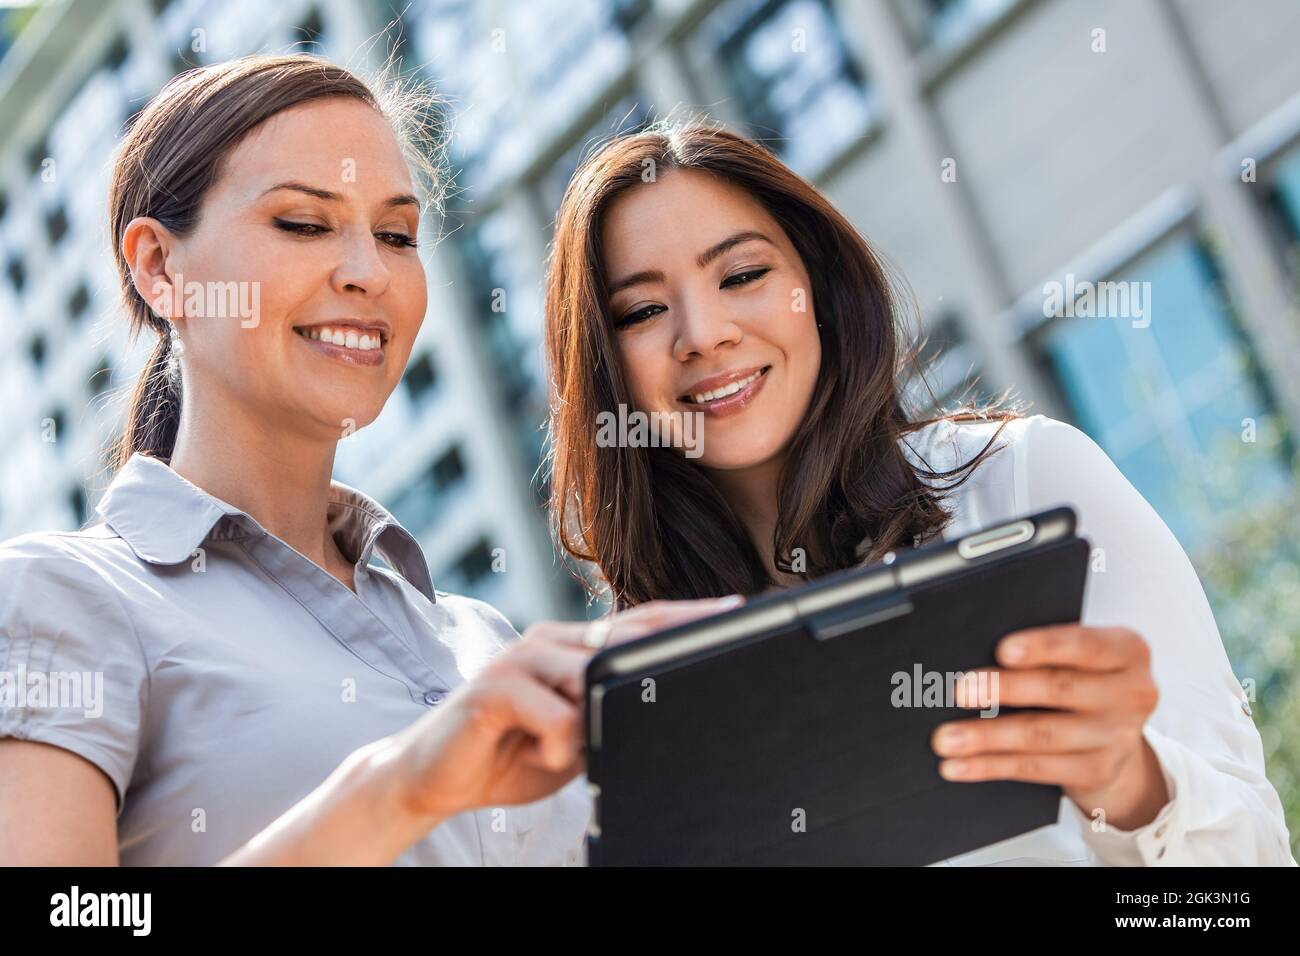 Business team of two successful women, mixed race group of businesswomen, Asian and Caucasian using a tablet computer in a modern city Stock Photo